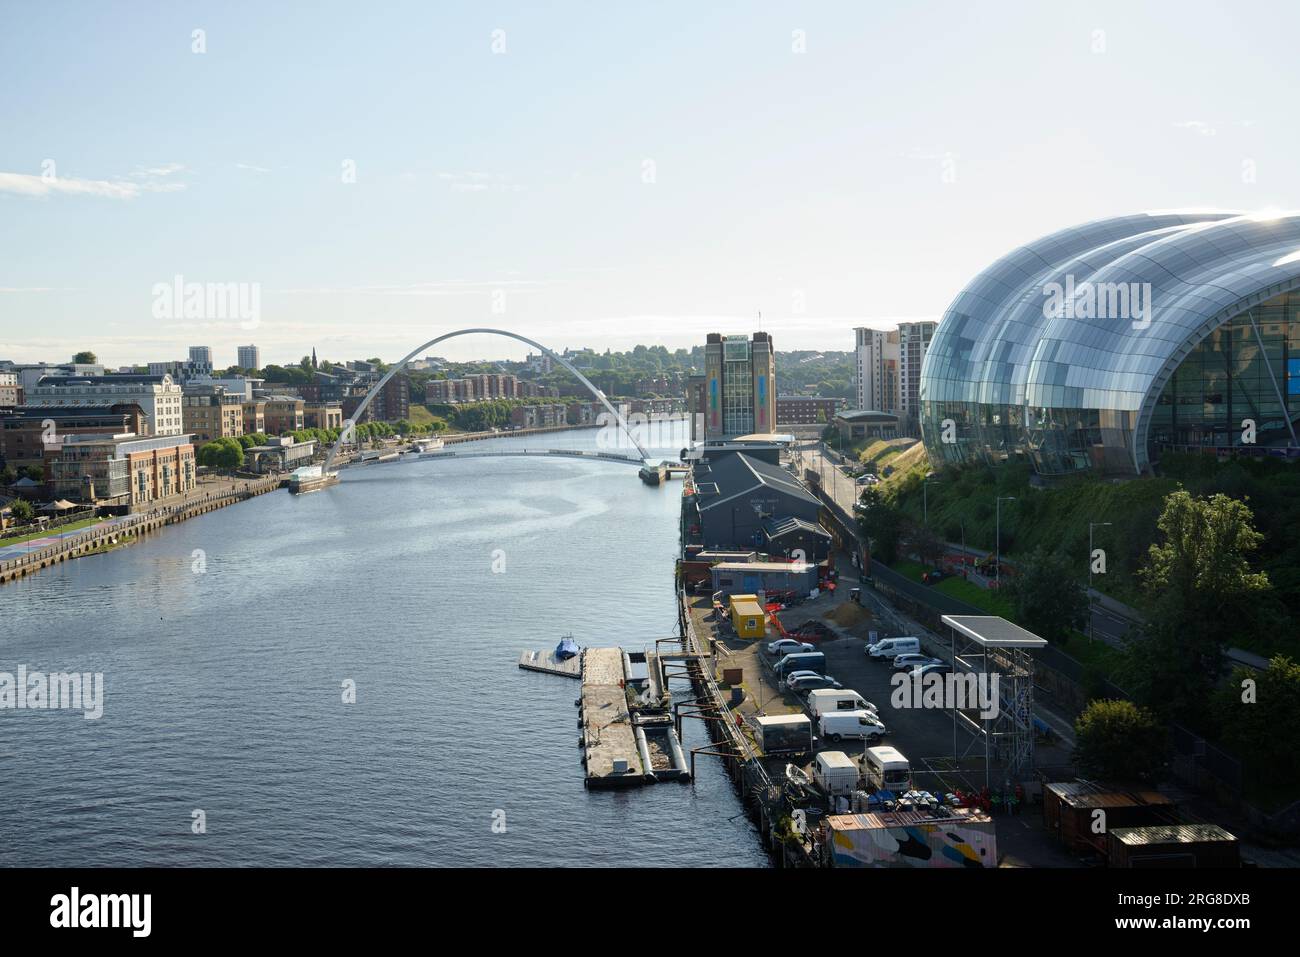 The river Tyne at Newcastle with the Gateshead Millennium Bridge in the distance. The Sage Gateshead is on the right of the image. Stock Photo